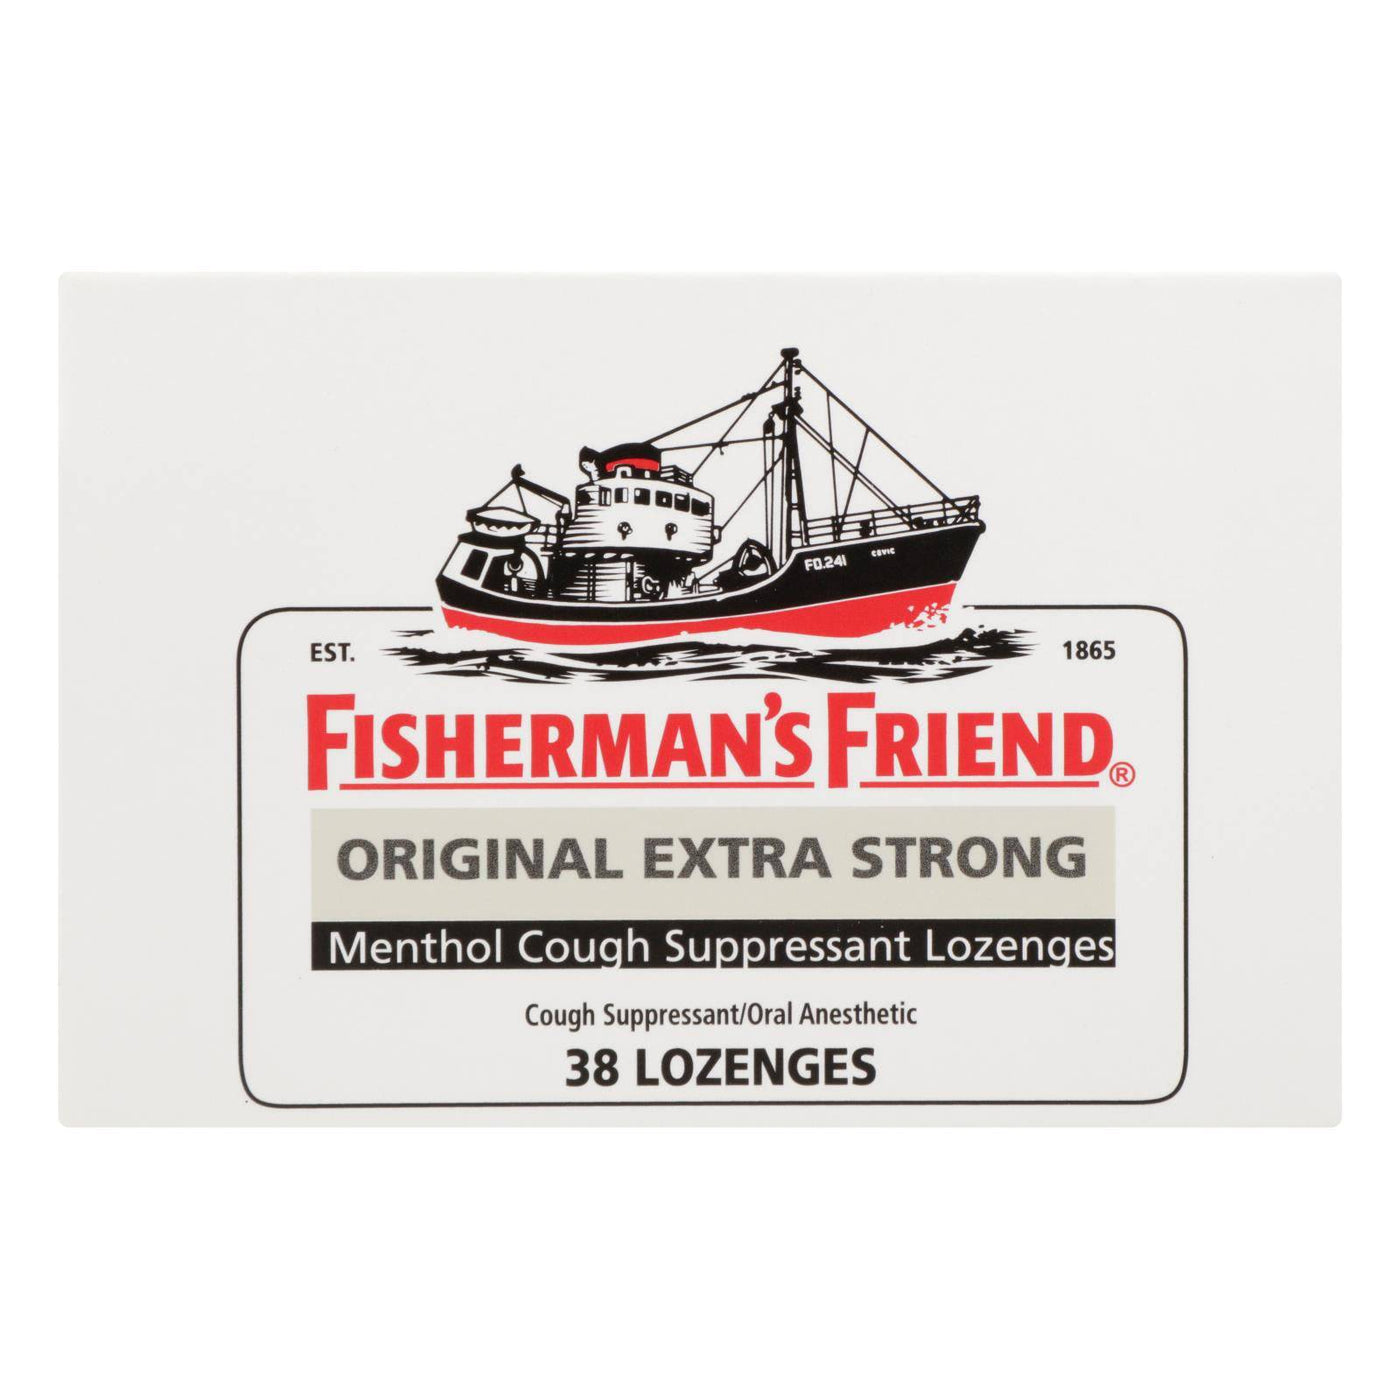 Fisherman's Friend Lozenges - Original Extra Strong - Dsp - 38 Ct - 1 Case | OnlyNaturals.us